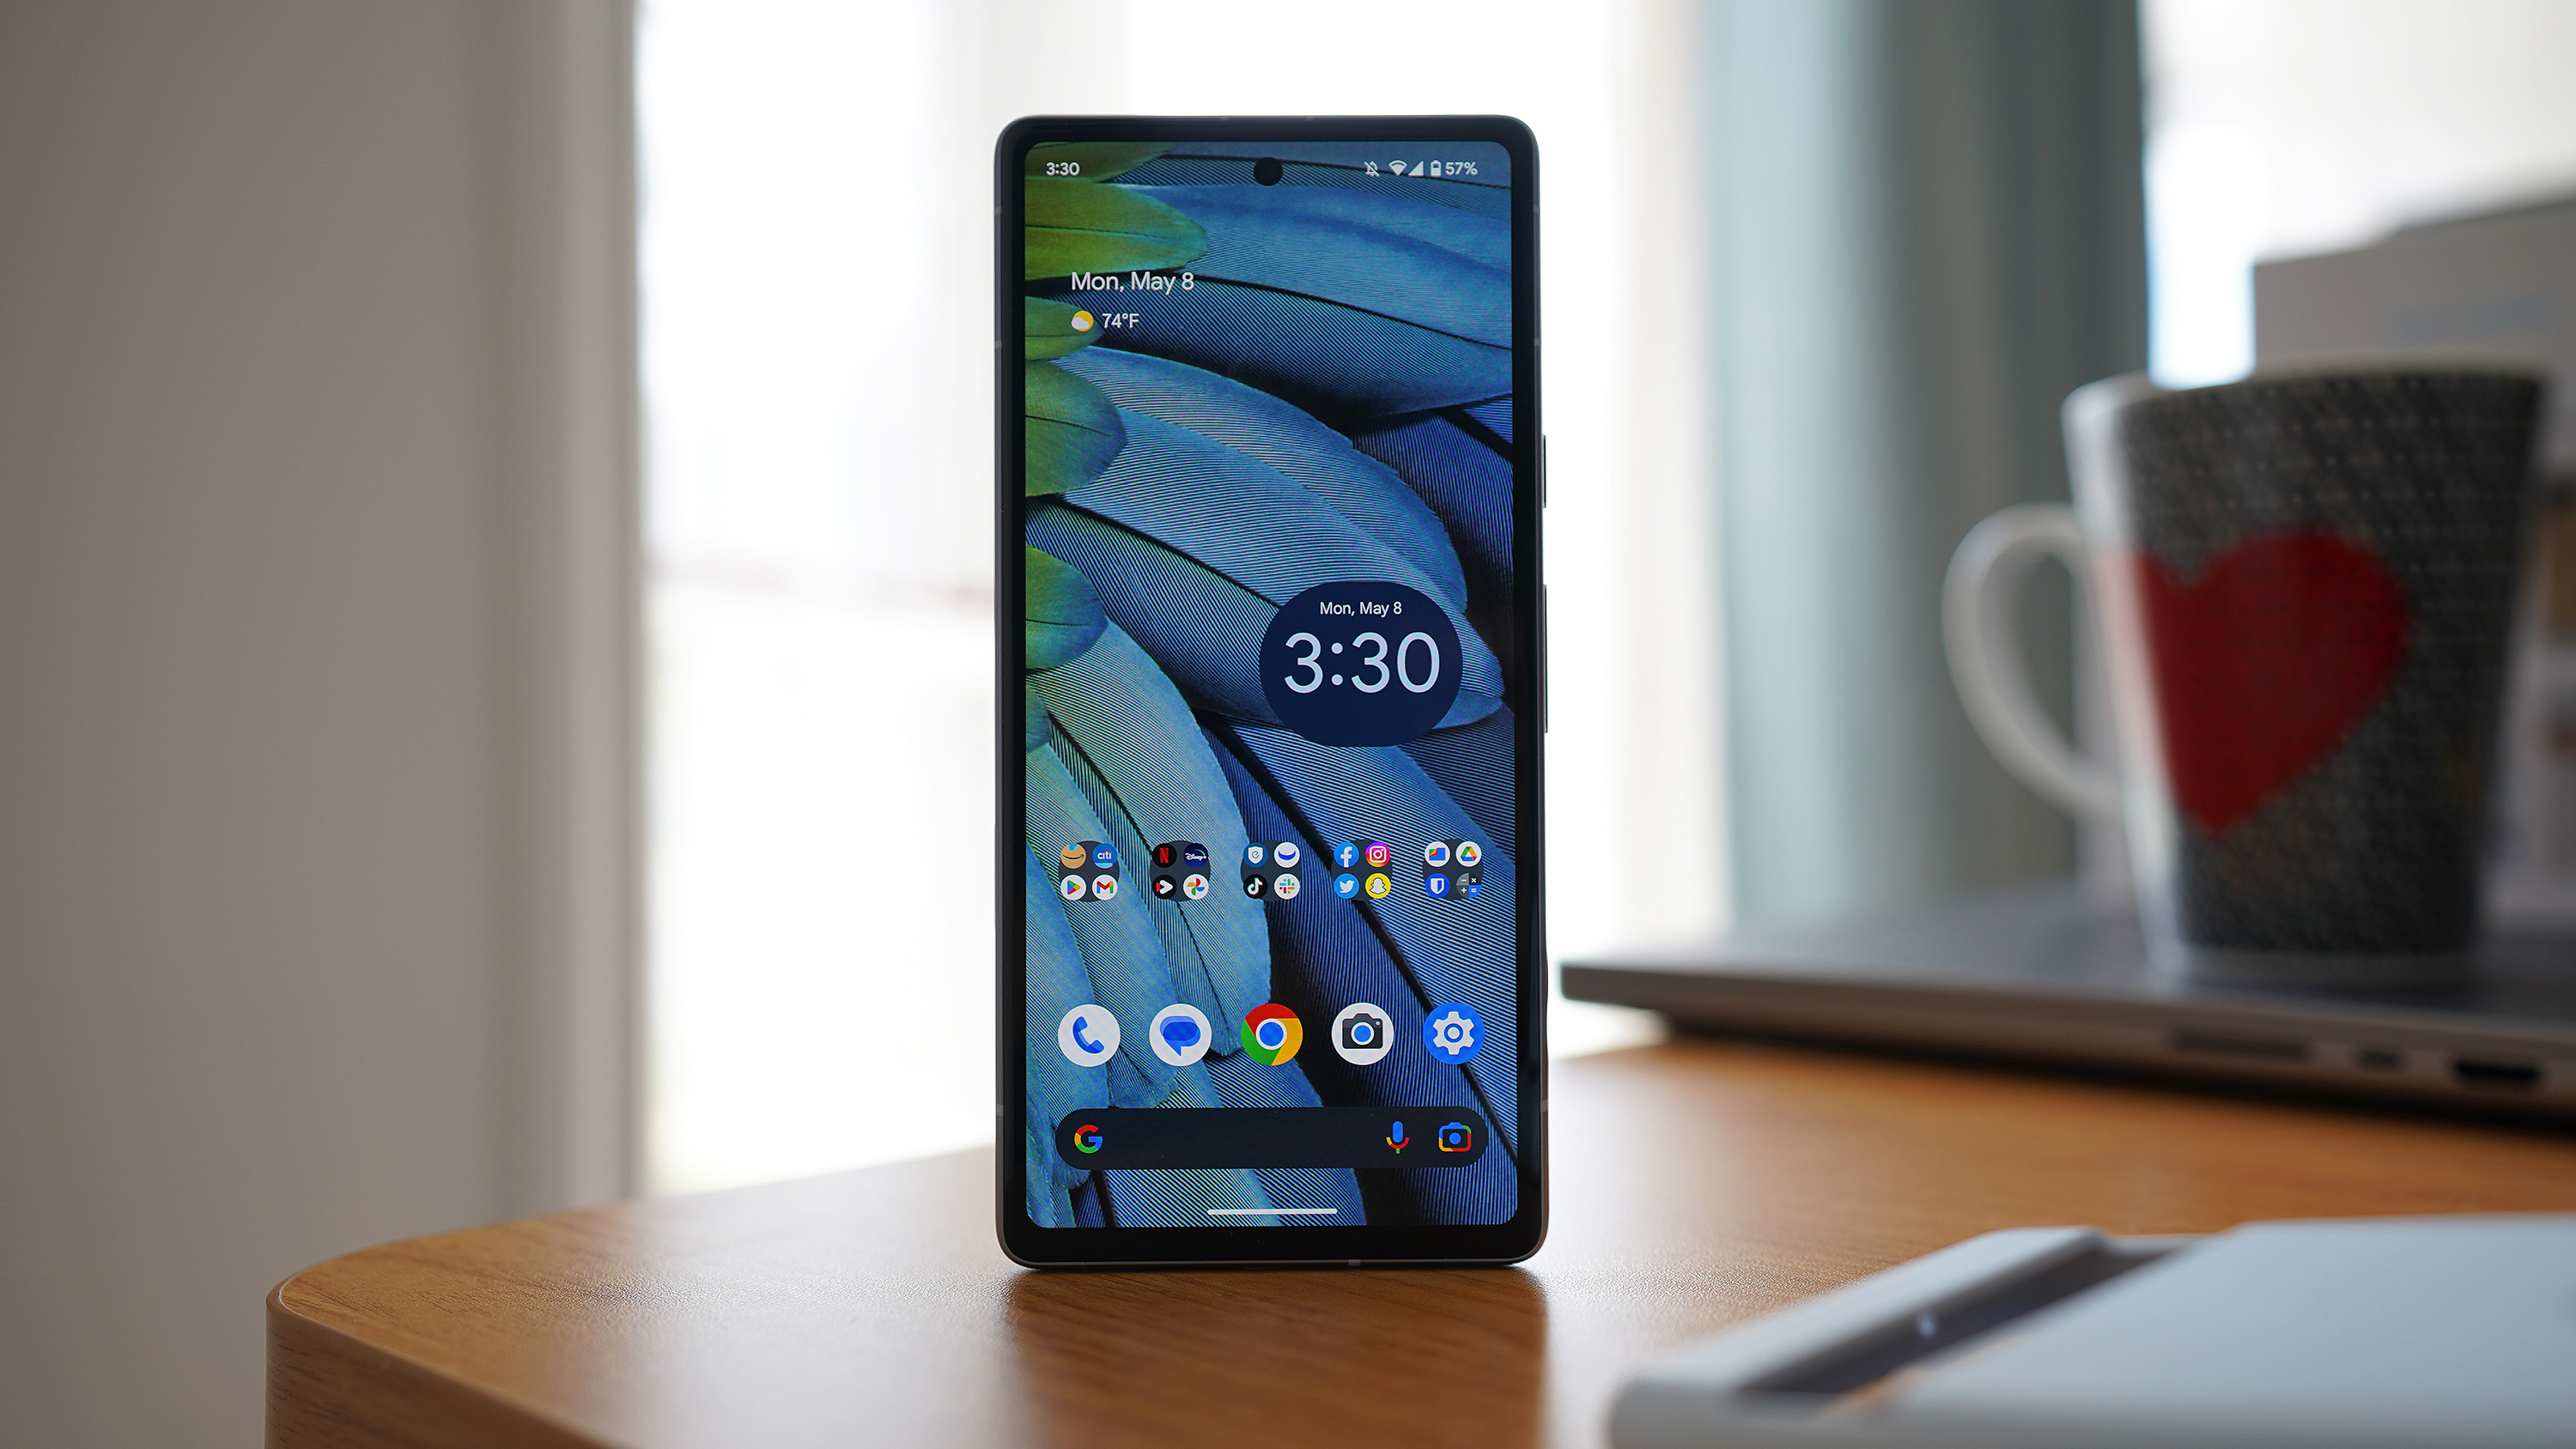 Google Pixel 7A 5G (128 GB Storage, 64 MP Camera) Price and features